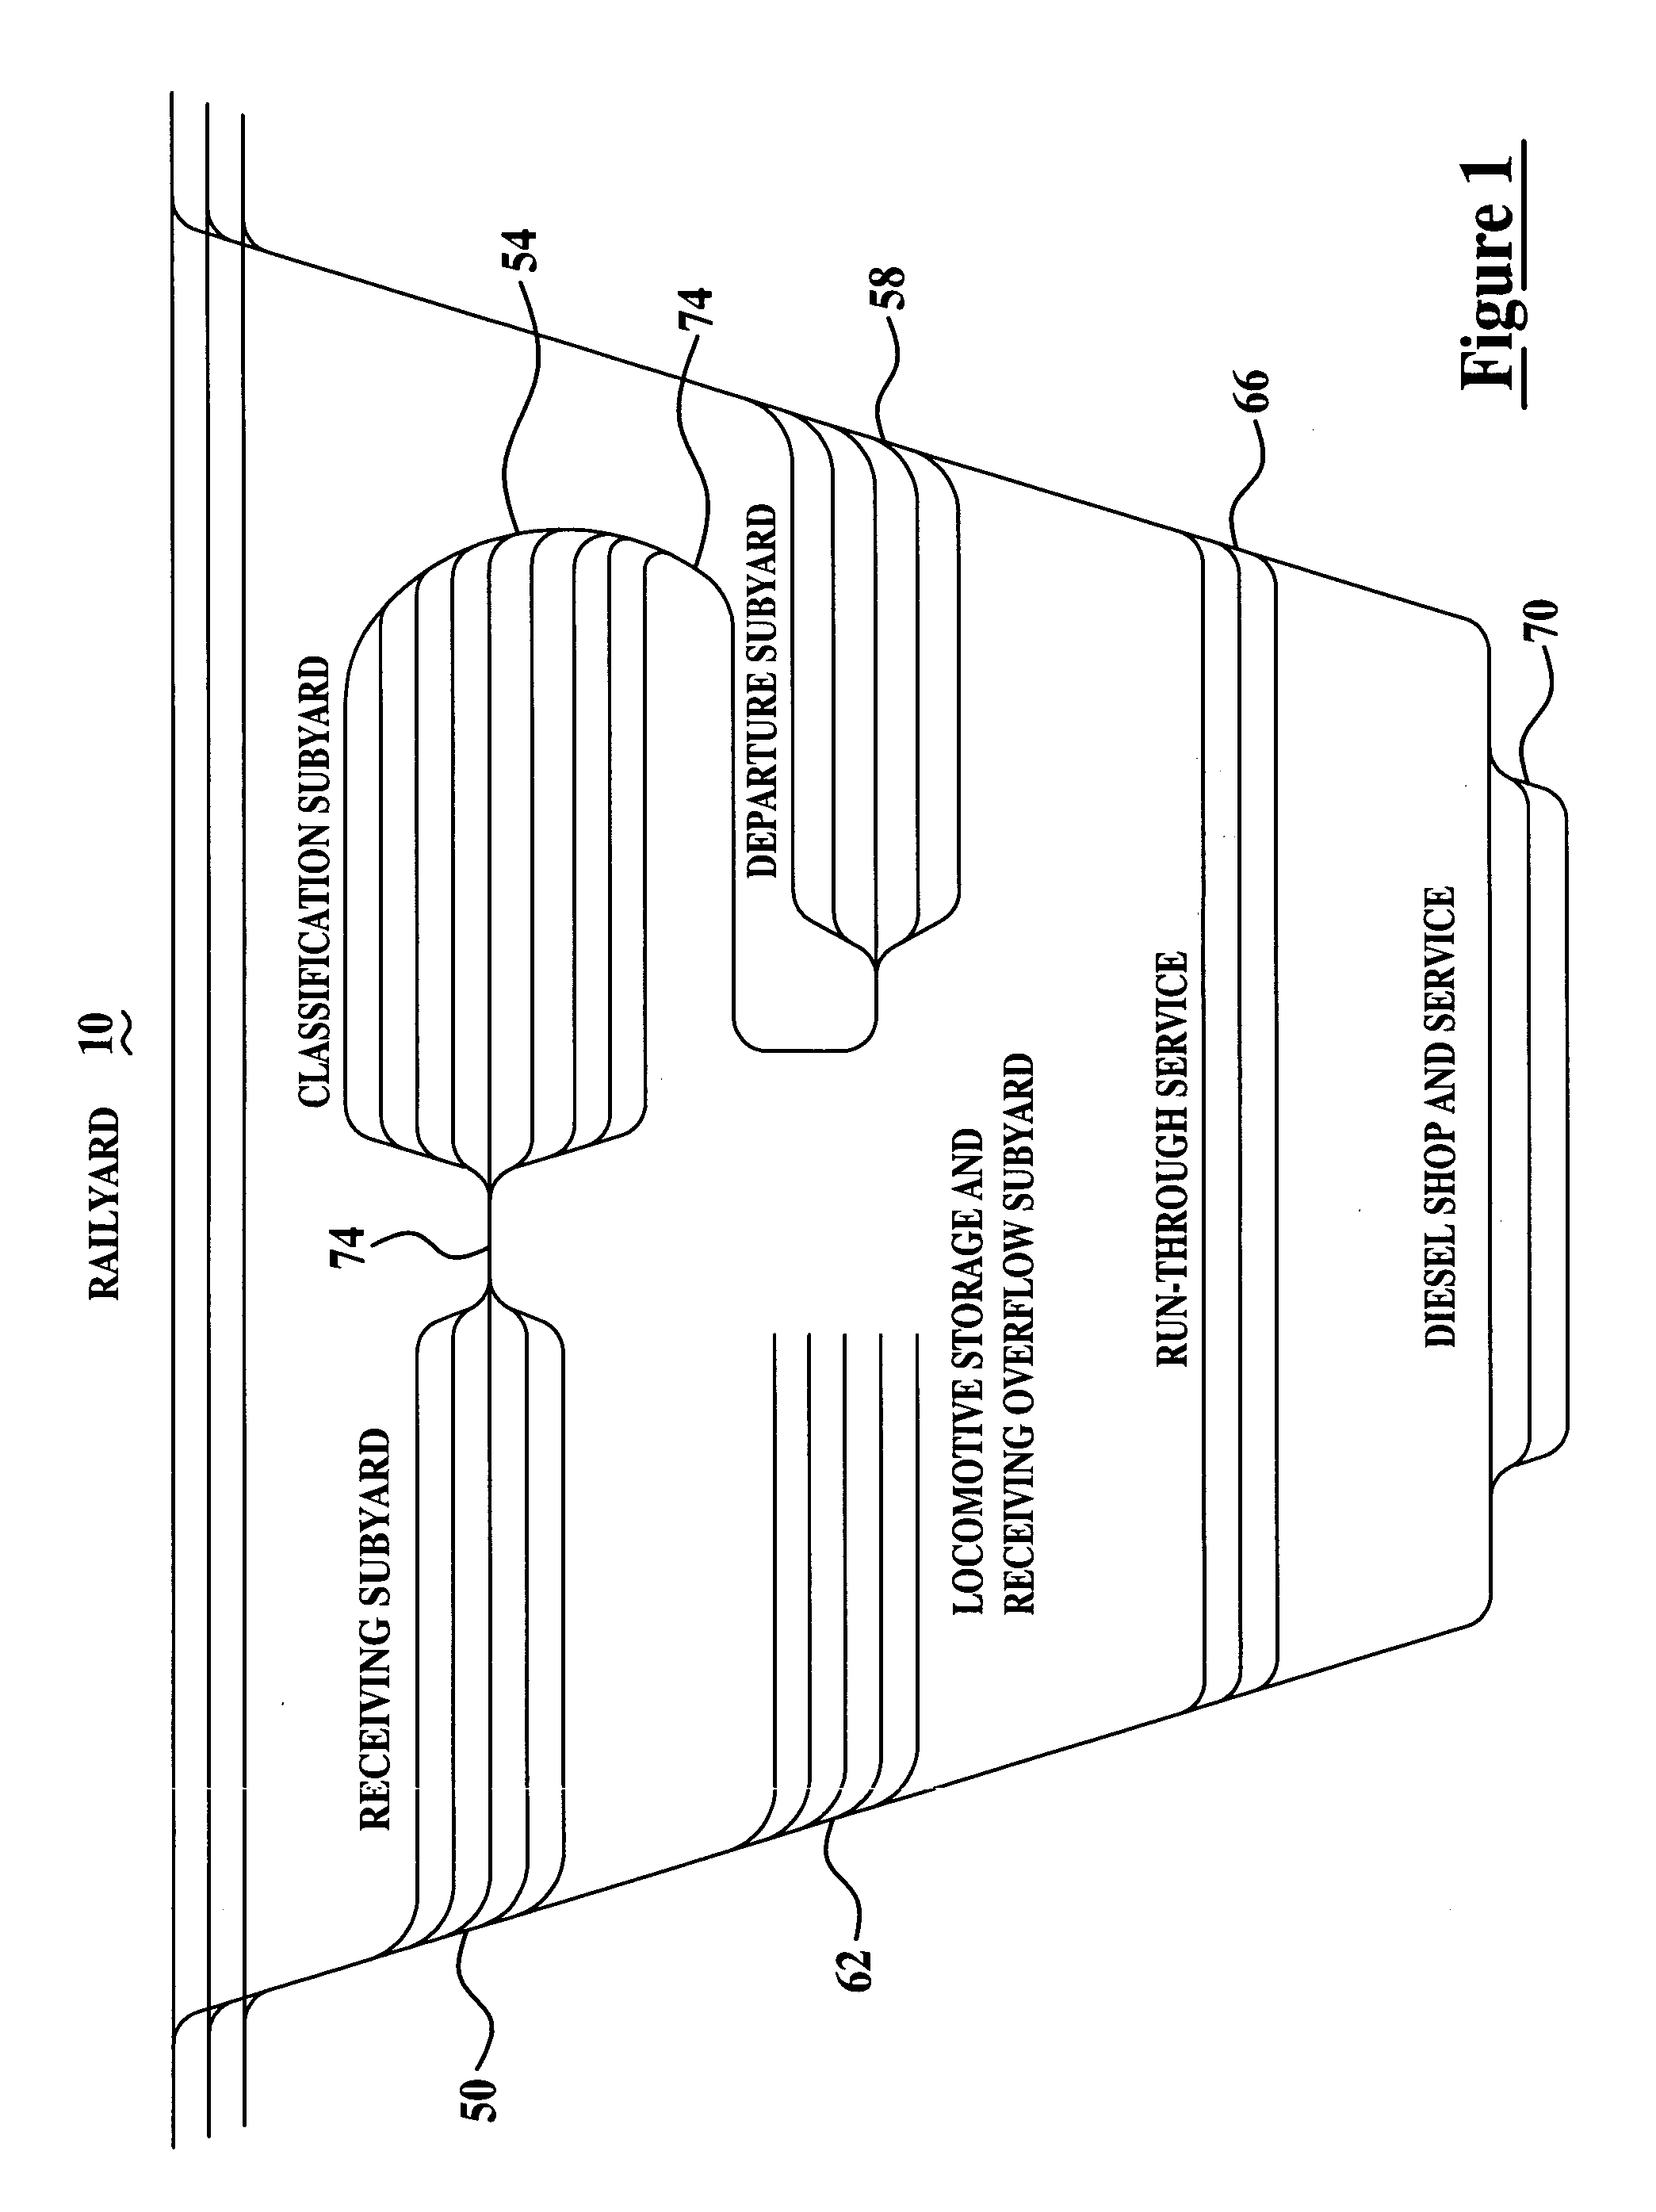 System and method for monitoring train arrival and departure latencies